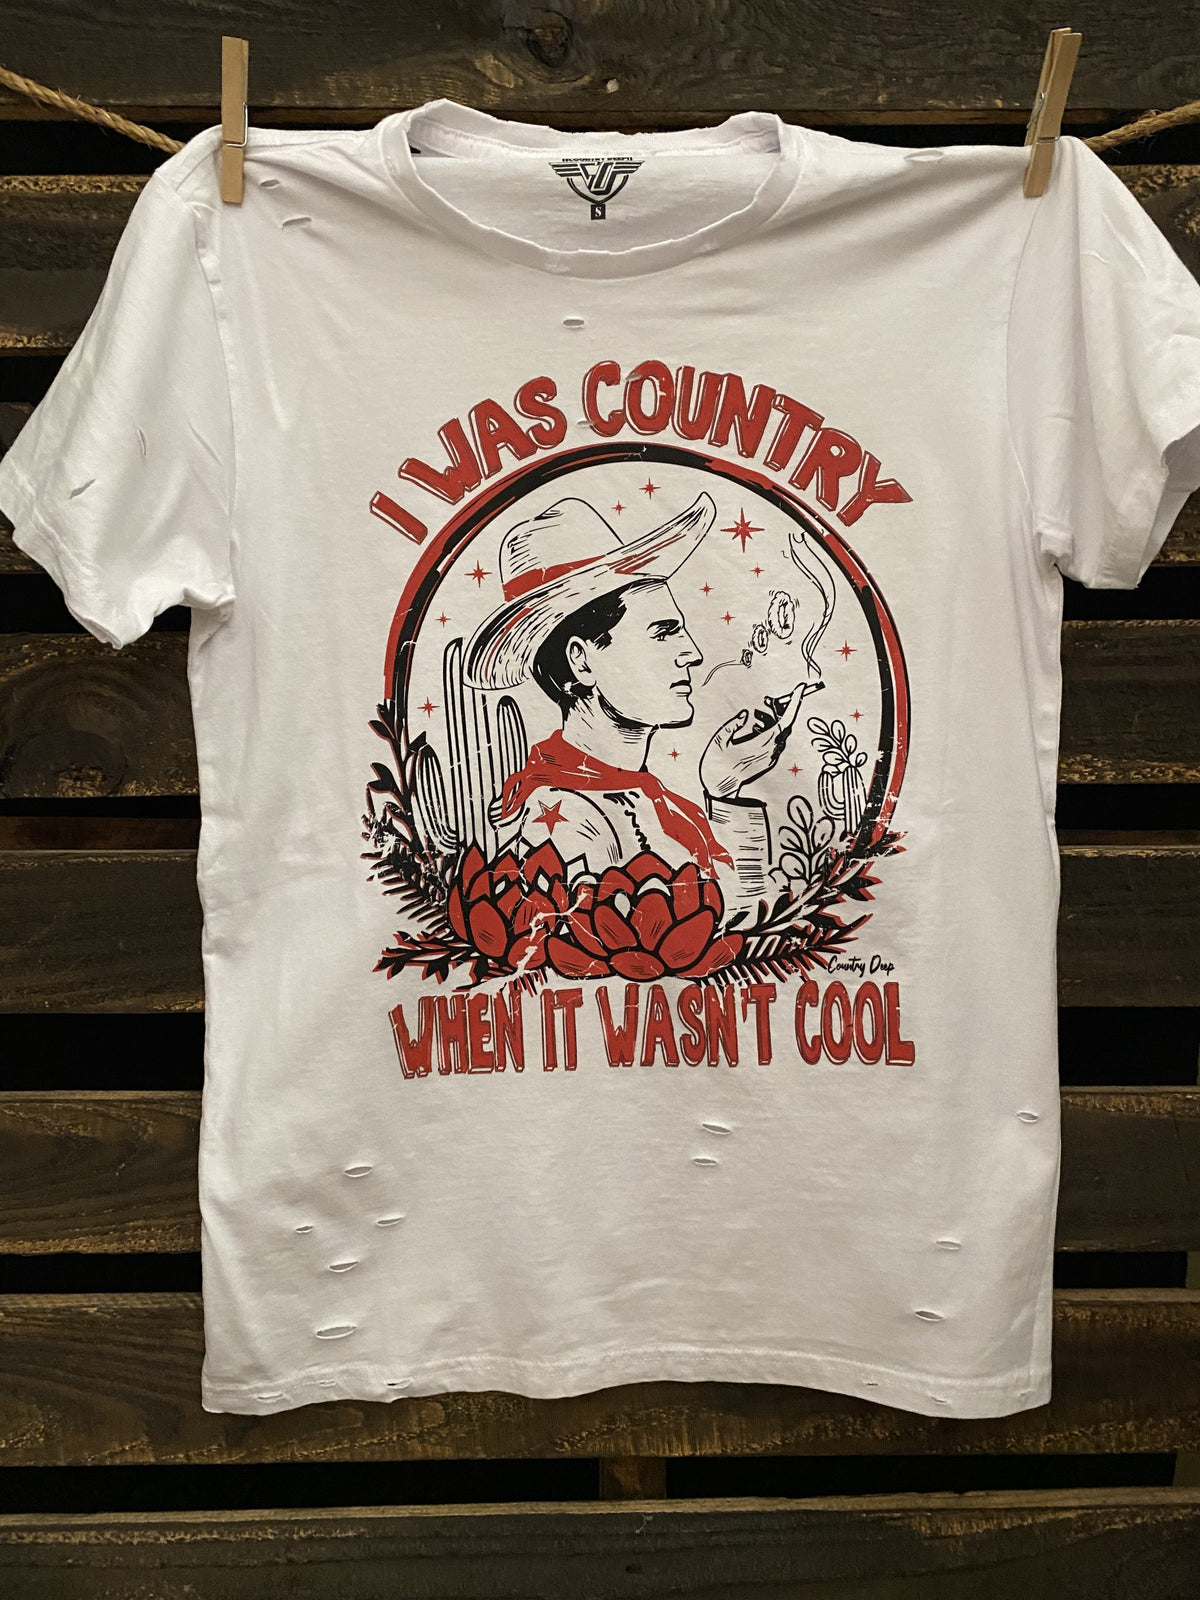 Country Deep I was Country Tee